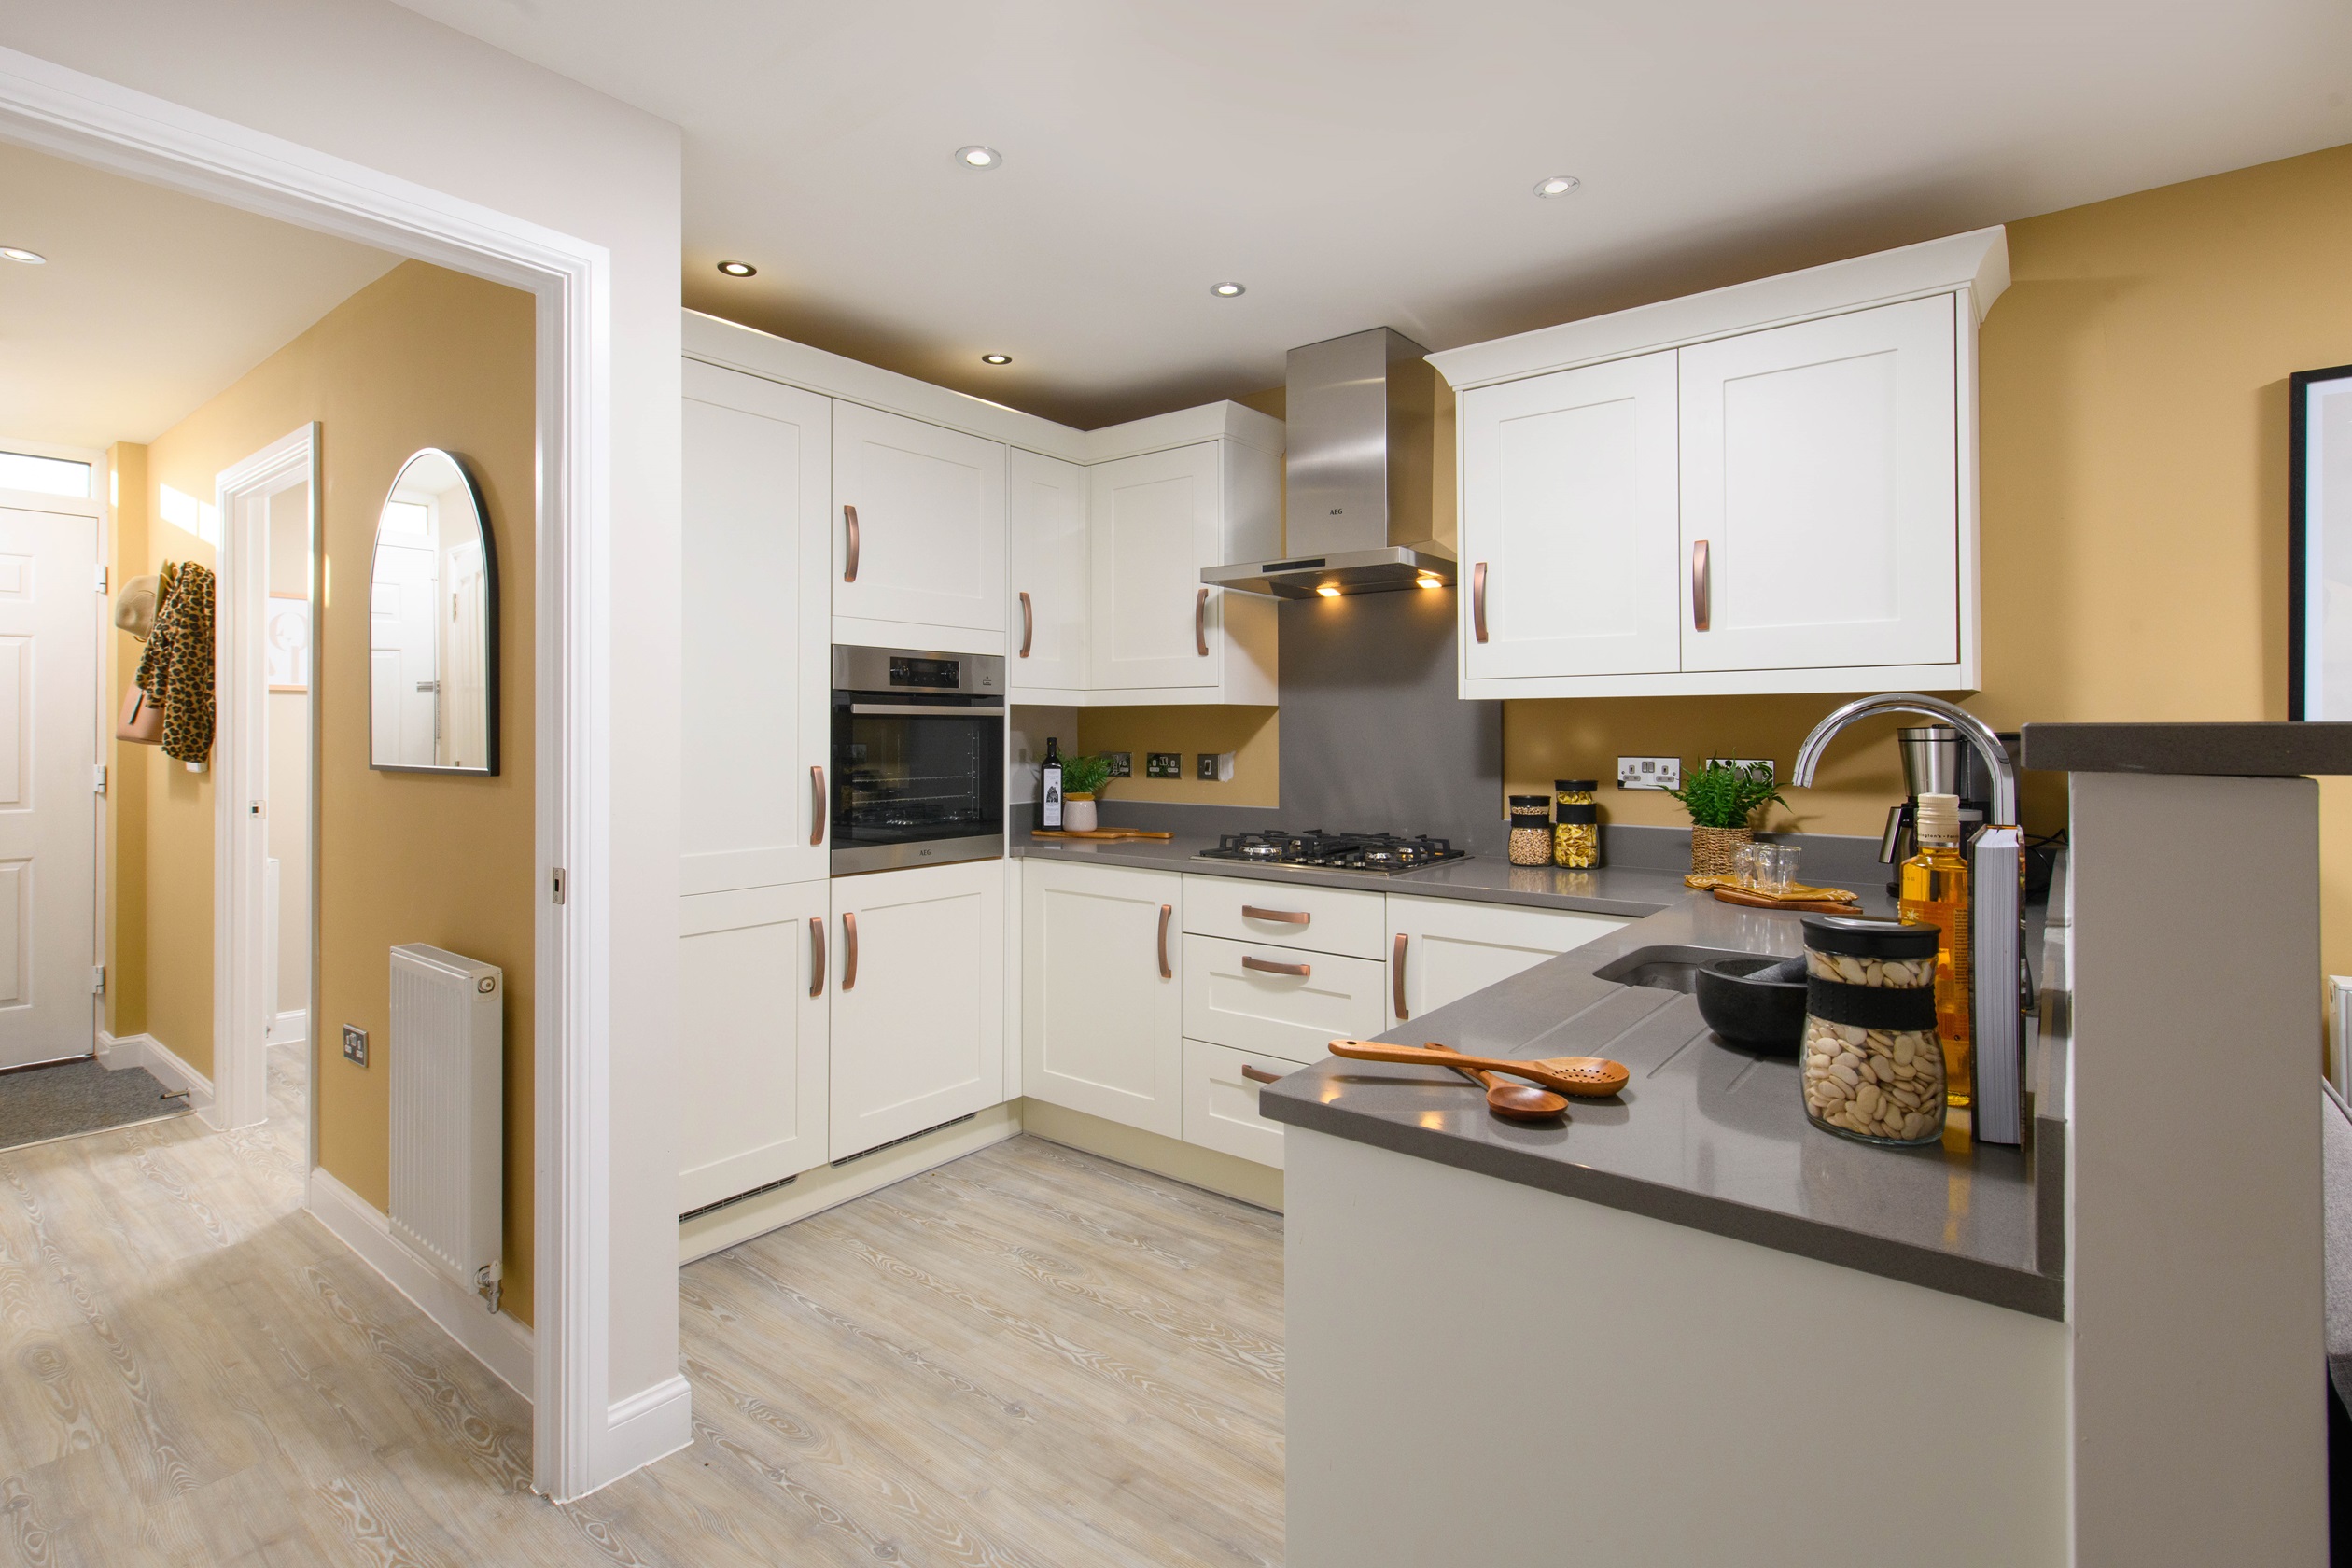 Property 2 of 10. Internal Kitchen Image Of The Greenwood At Gateford Manor